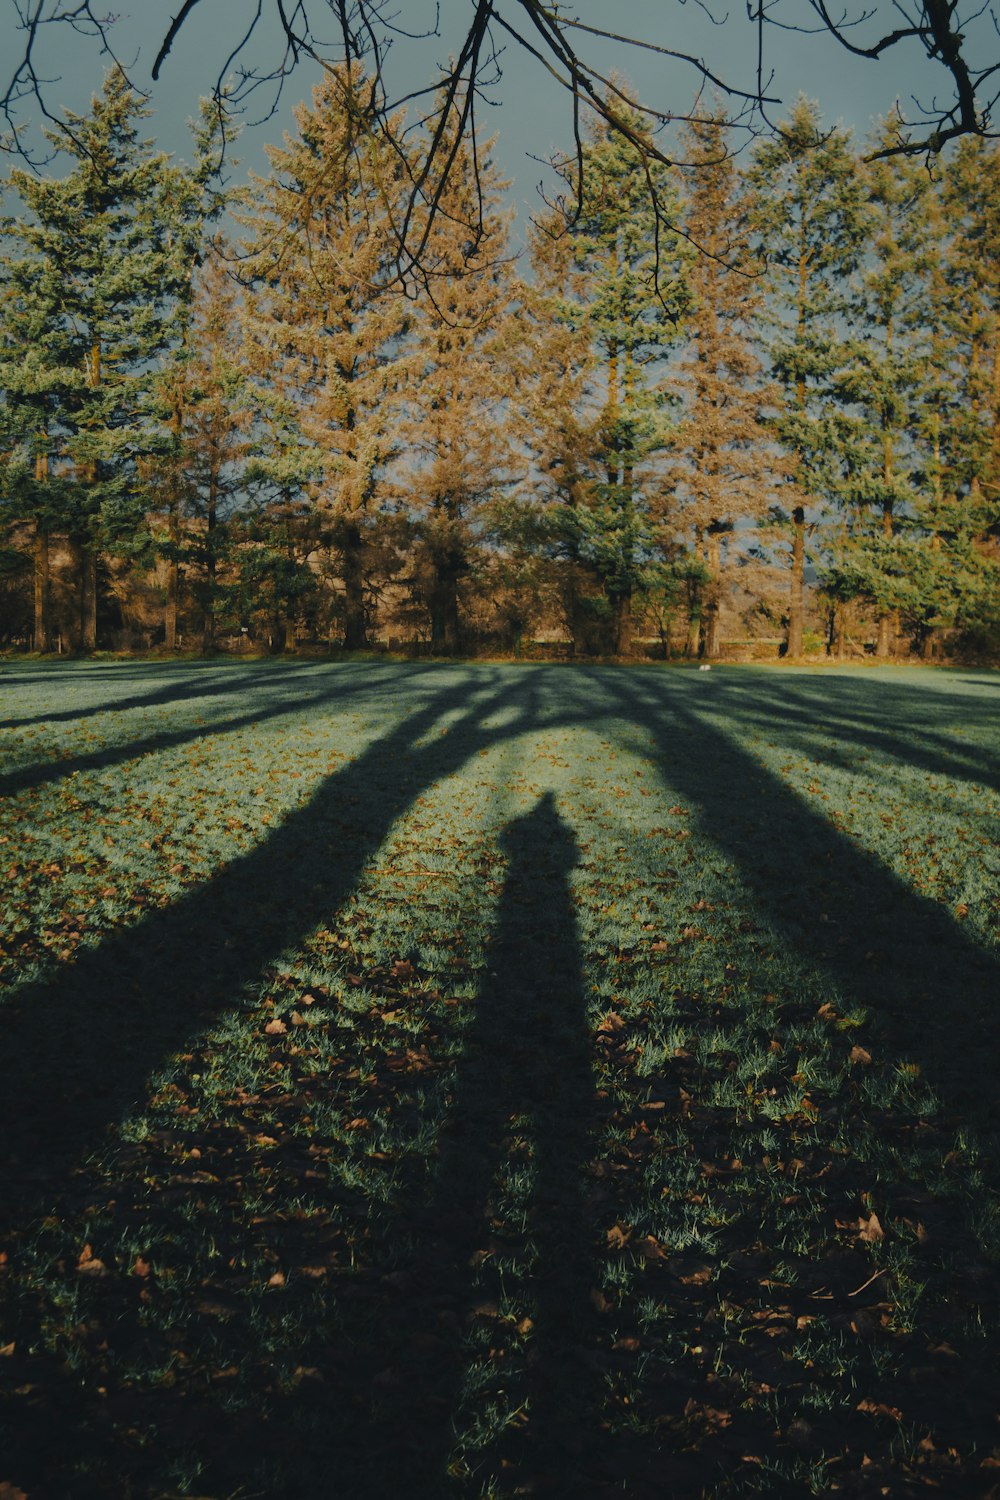 the shadow of two people standing in the grass